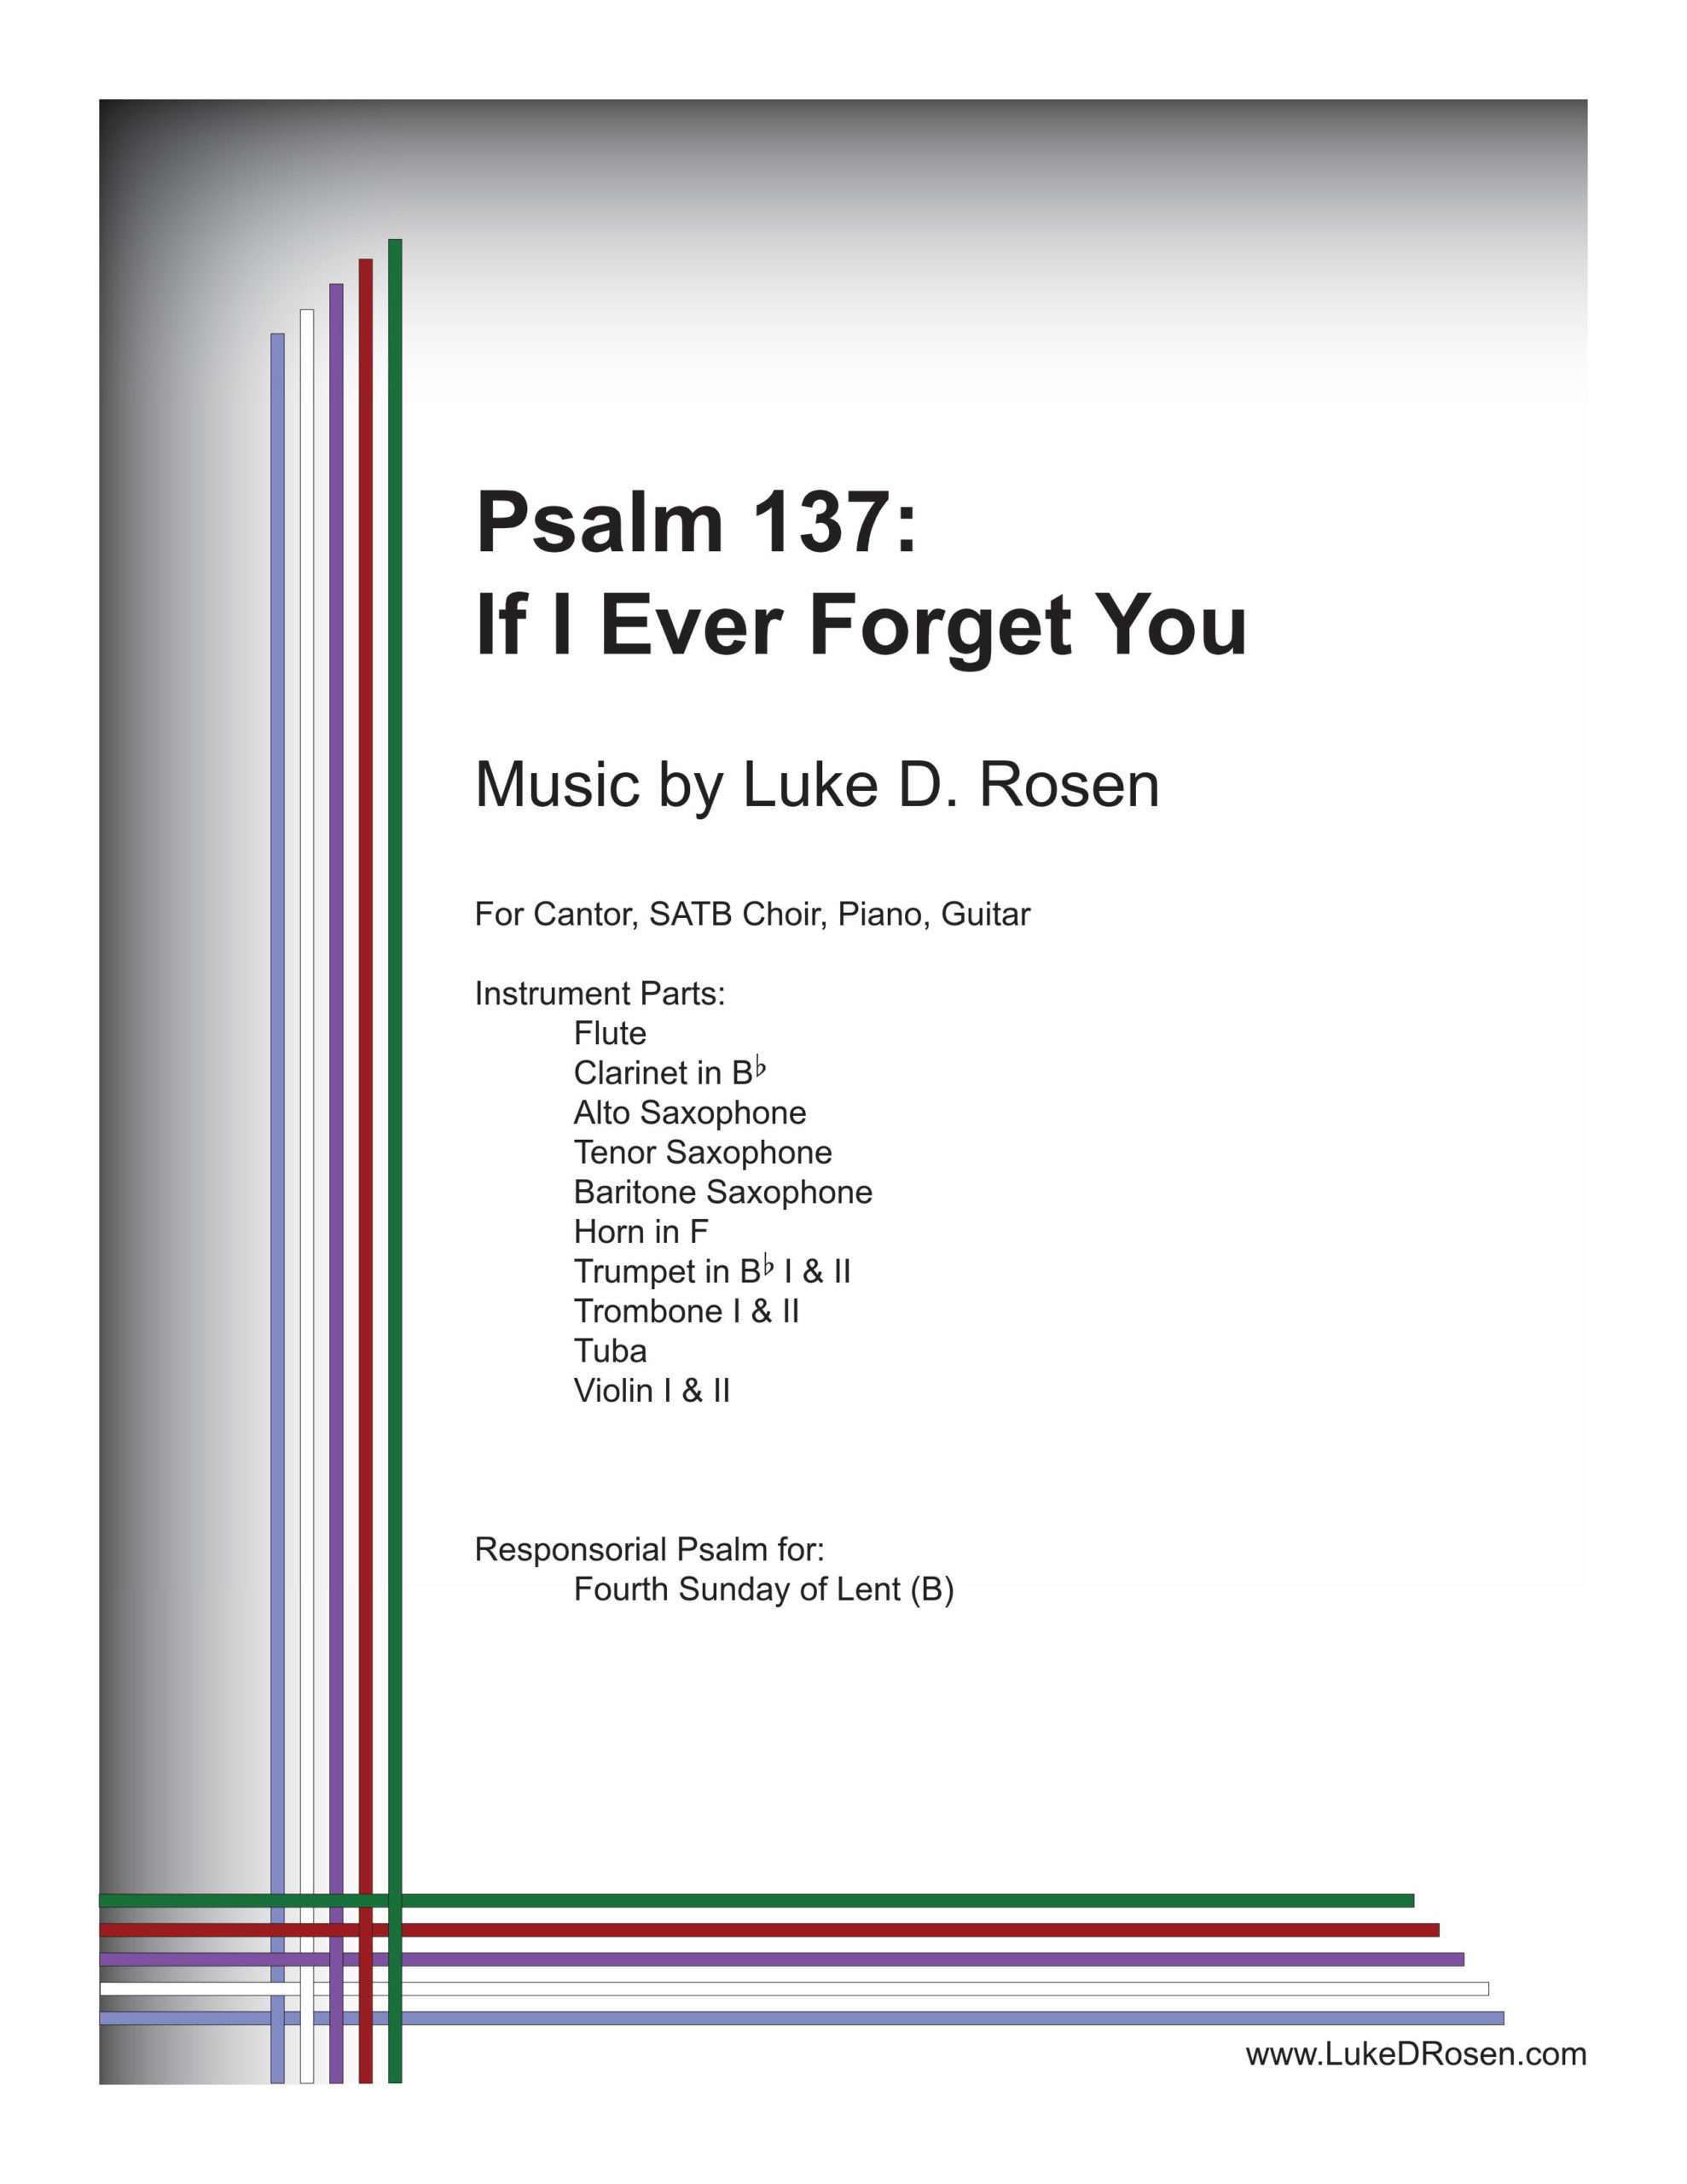 Psalm 137 – If I Ever Forget You (Rosen)